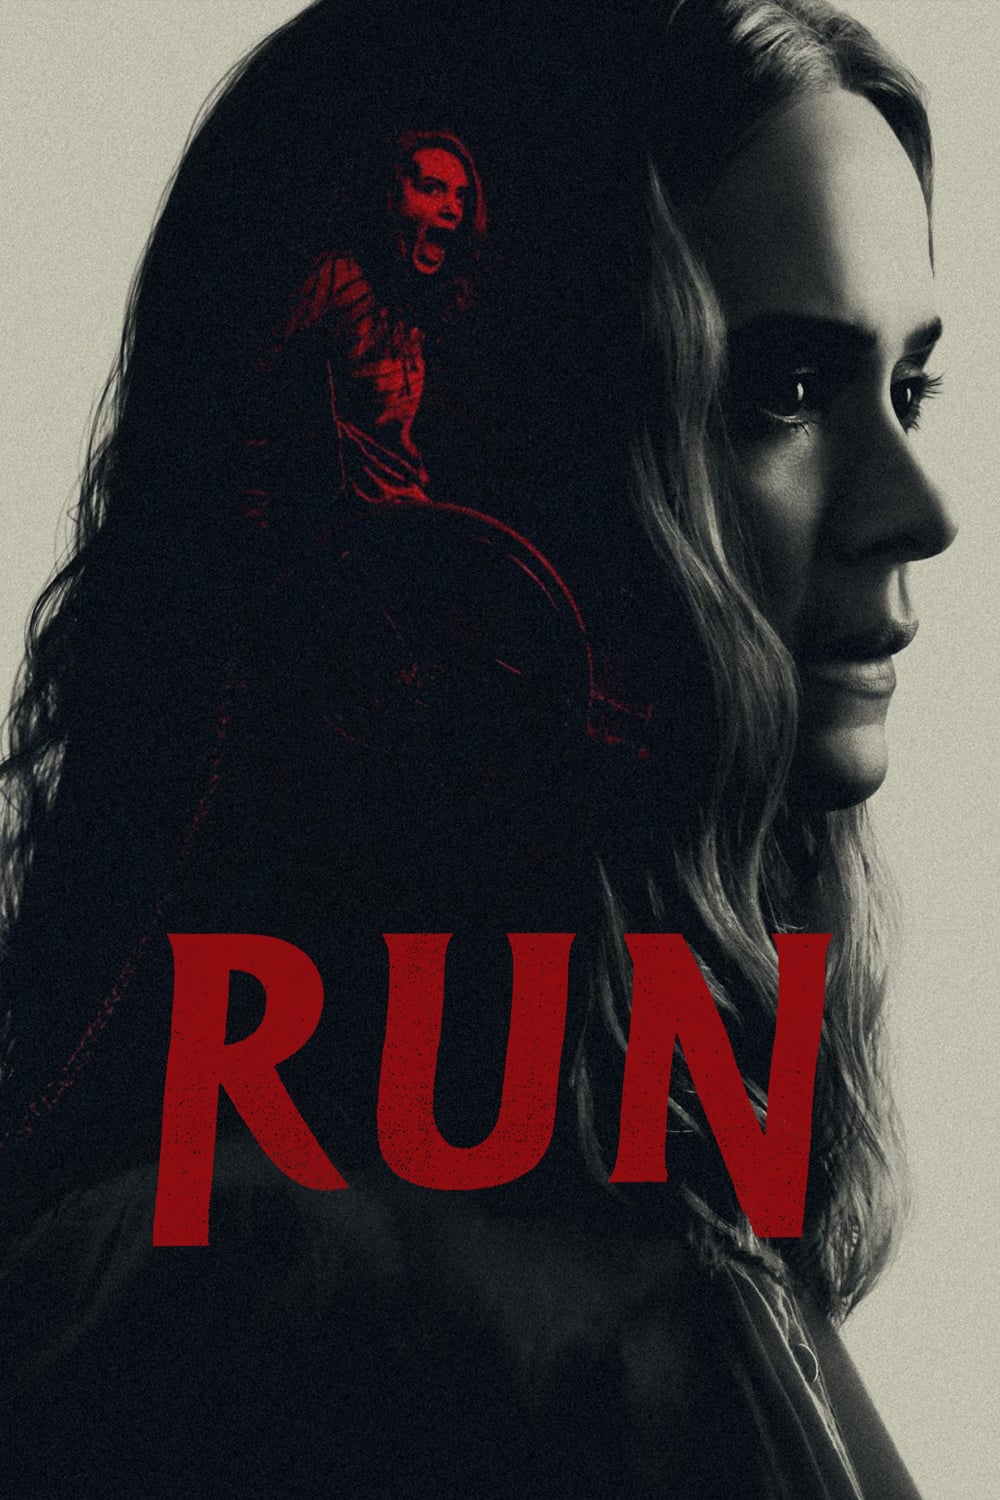 Poster for the movie "Run"